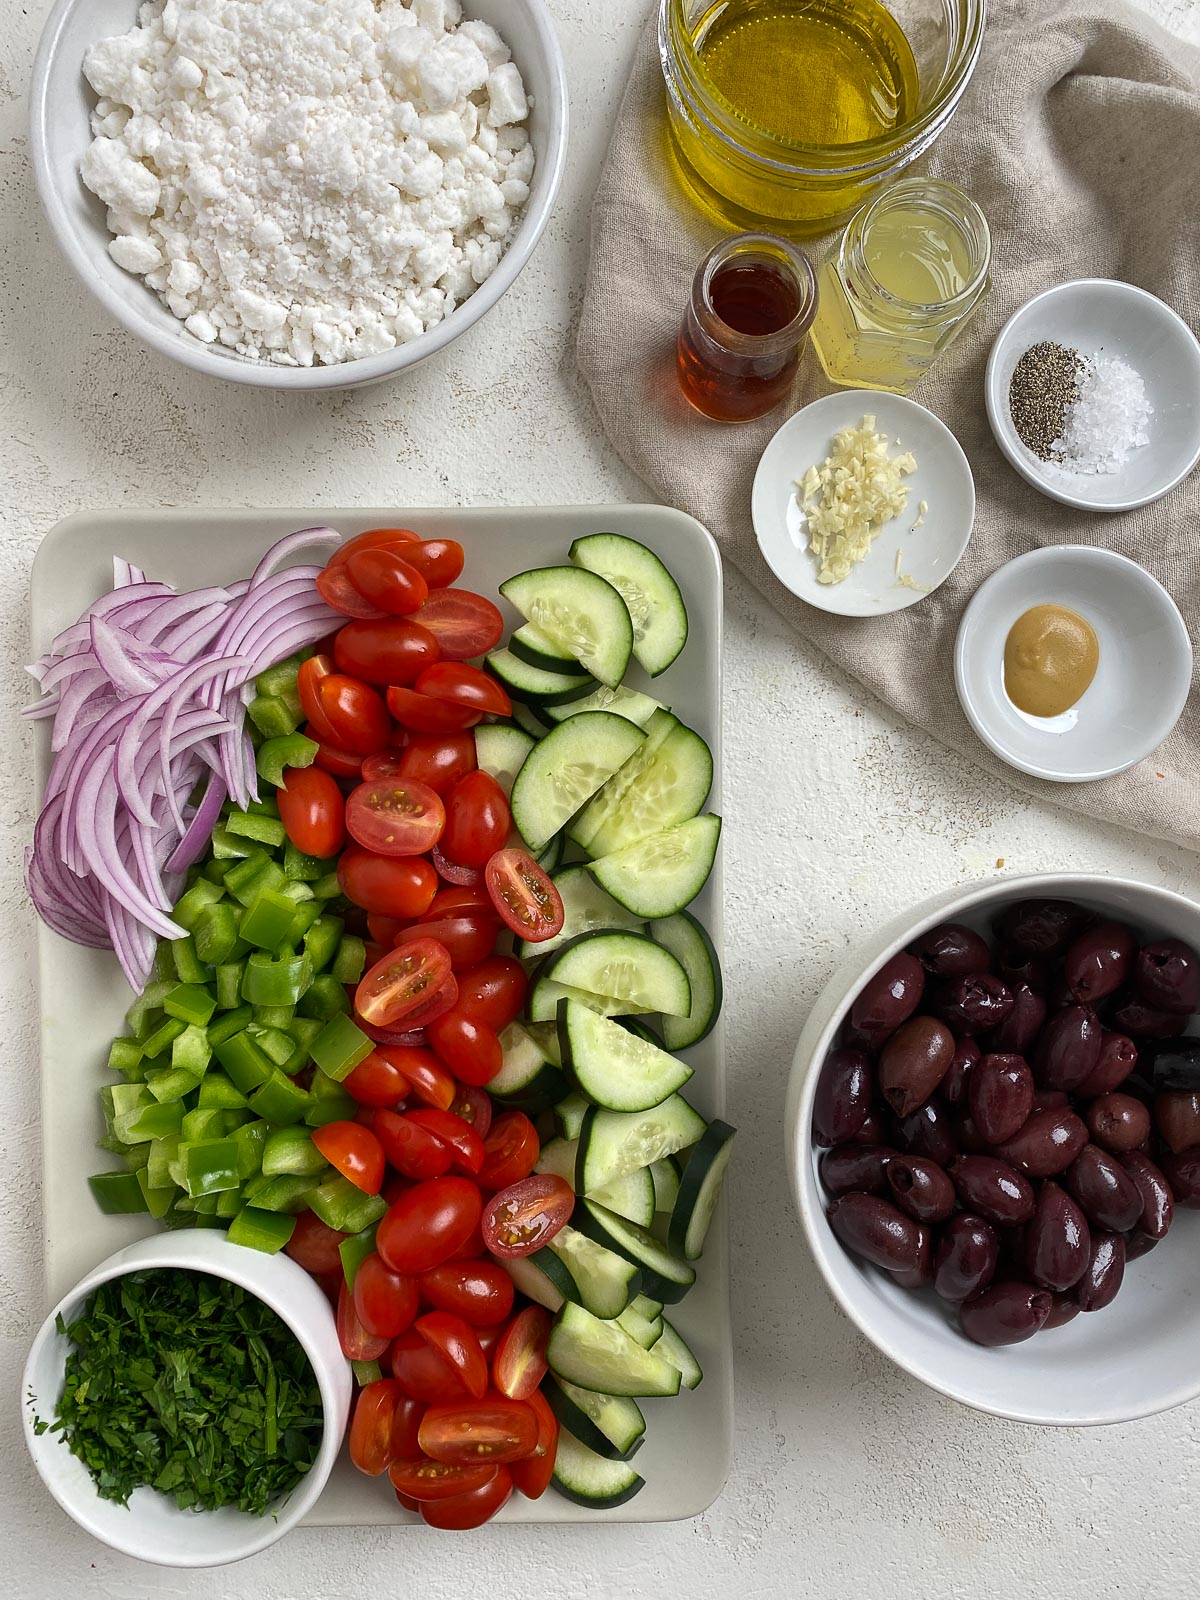 ingredients for Vegan Greek Salad measured out against a white surface